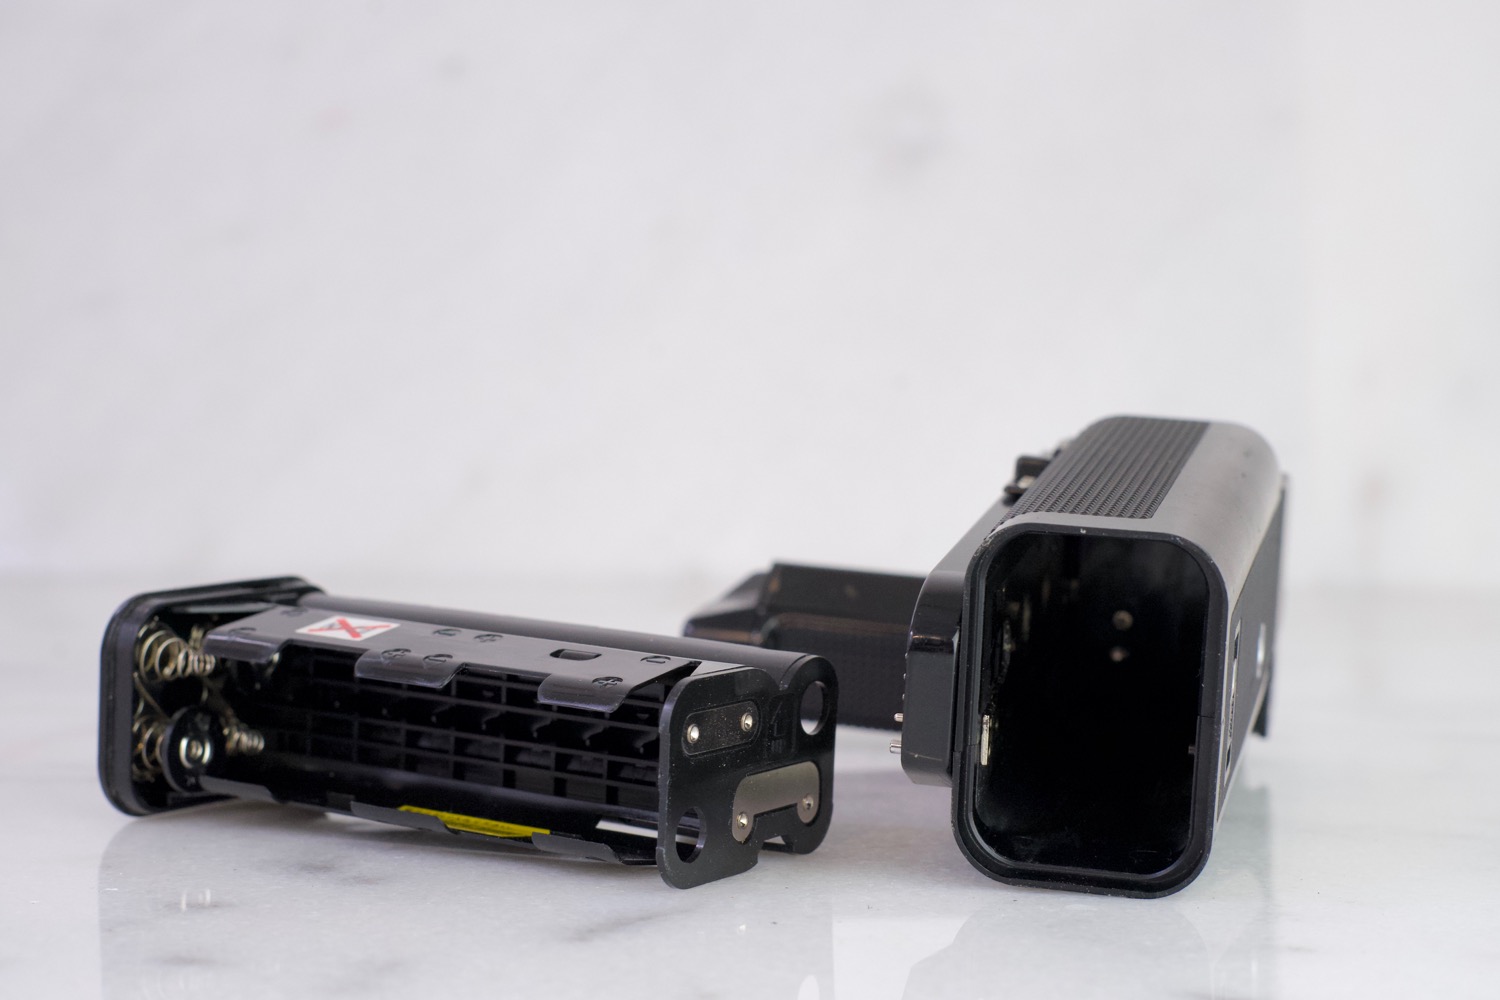 Canon Motor Drive MA for A-series Cameras - AE-1, A-1, Ae-1 